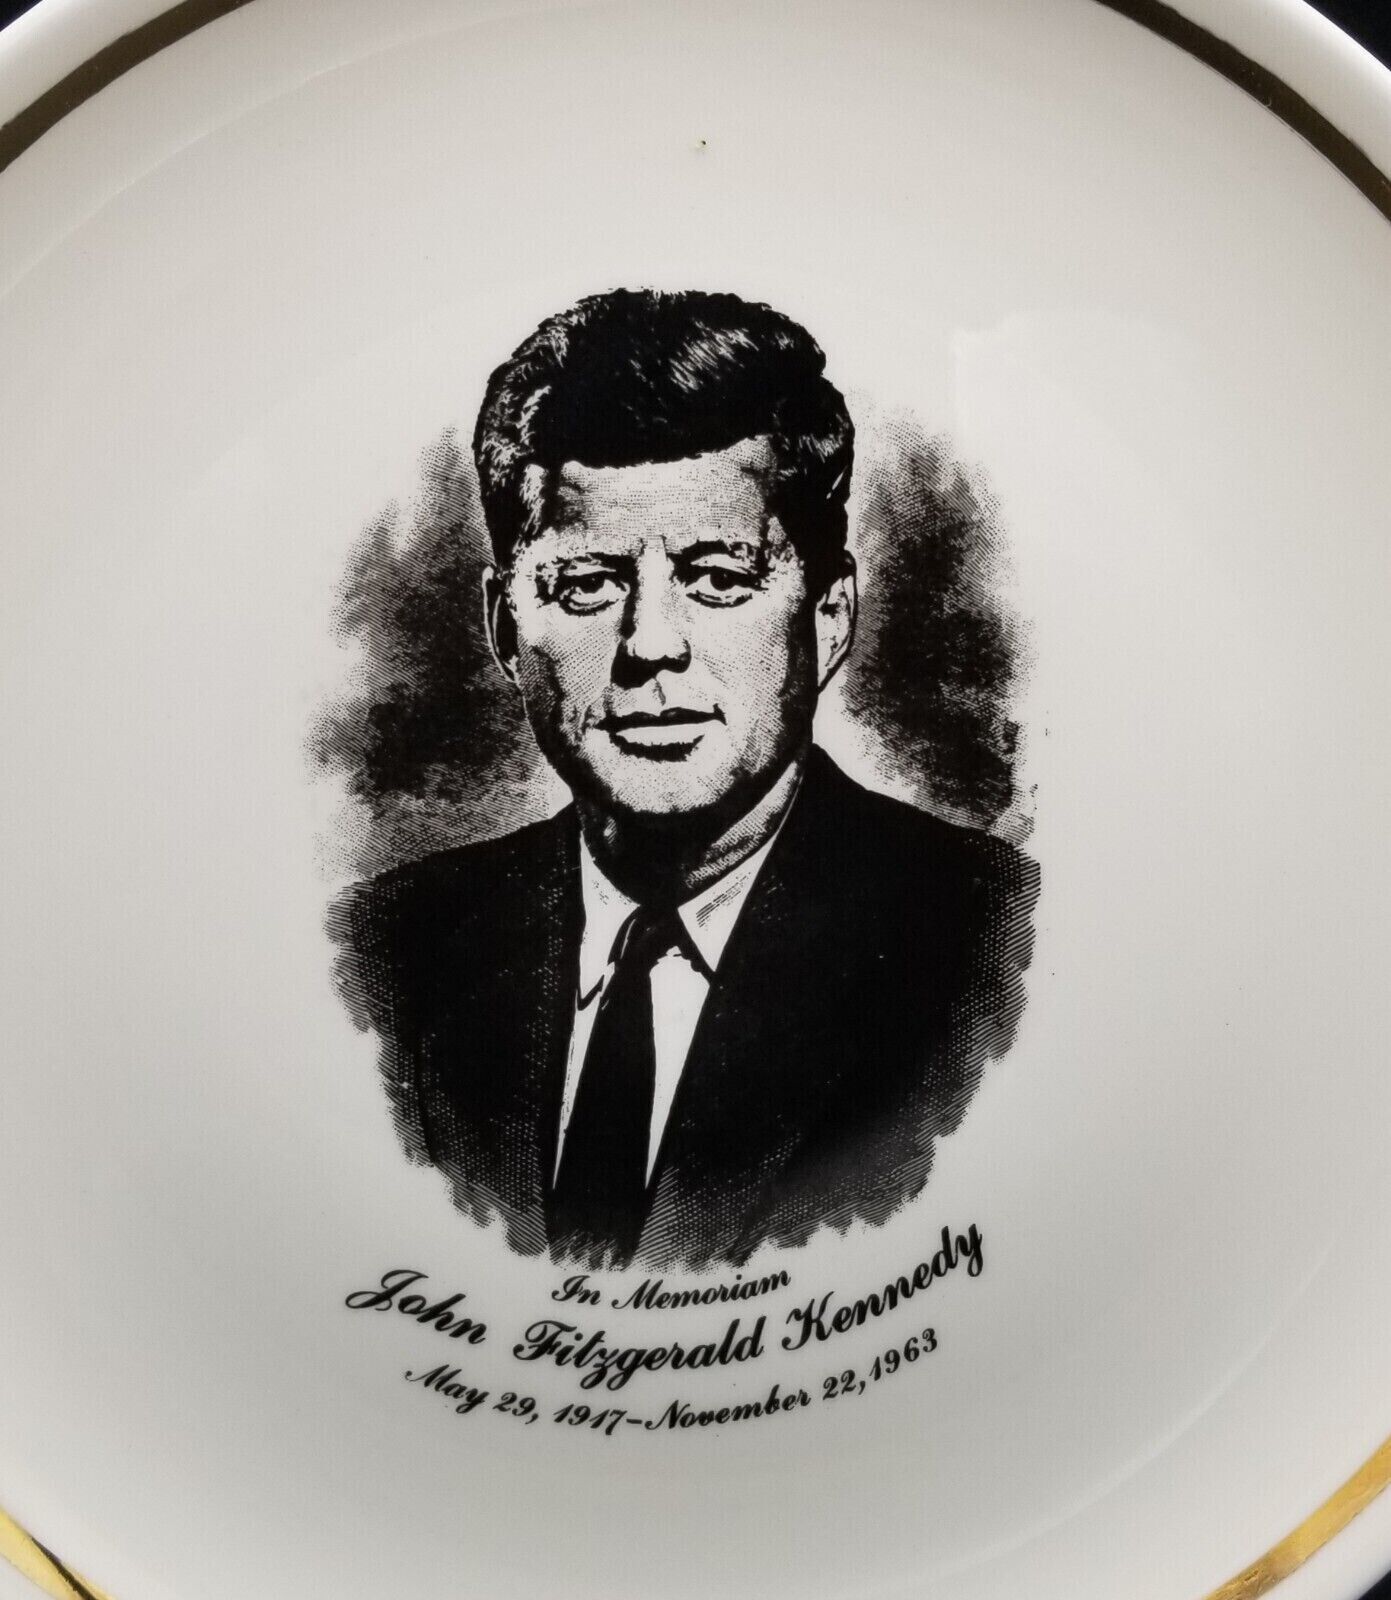 In Memoriam John Fitzgerald Kennedy May 29, 1917-November 22, 1963 Plate Collect